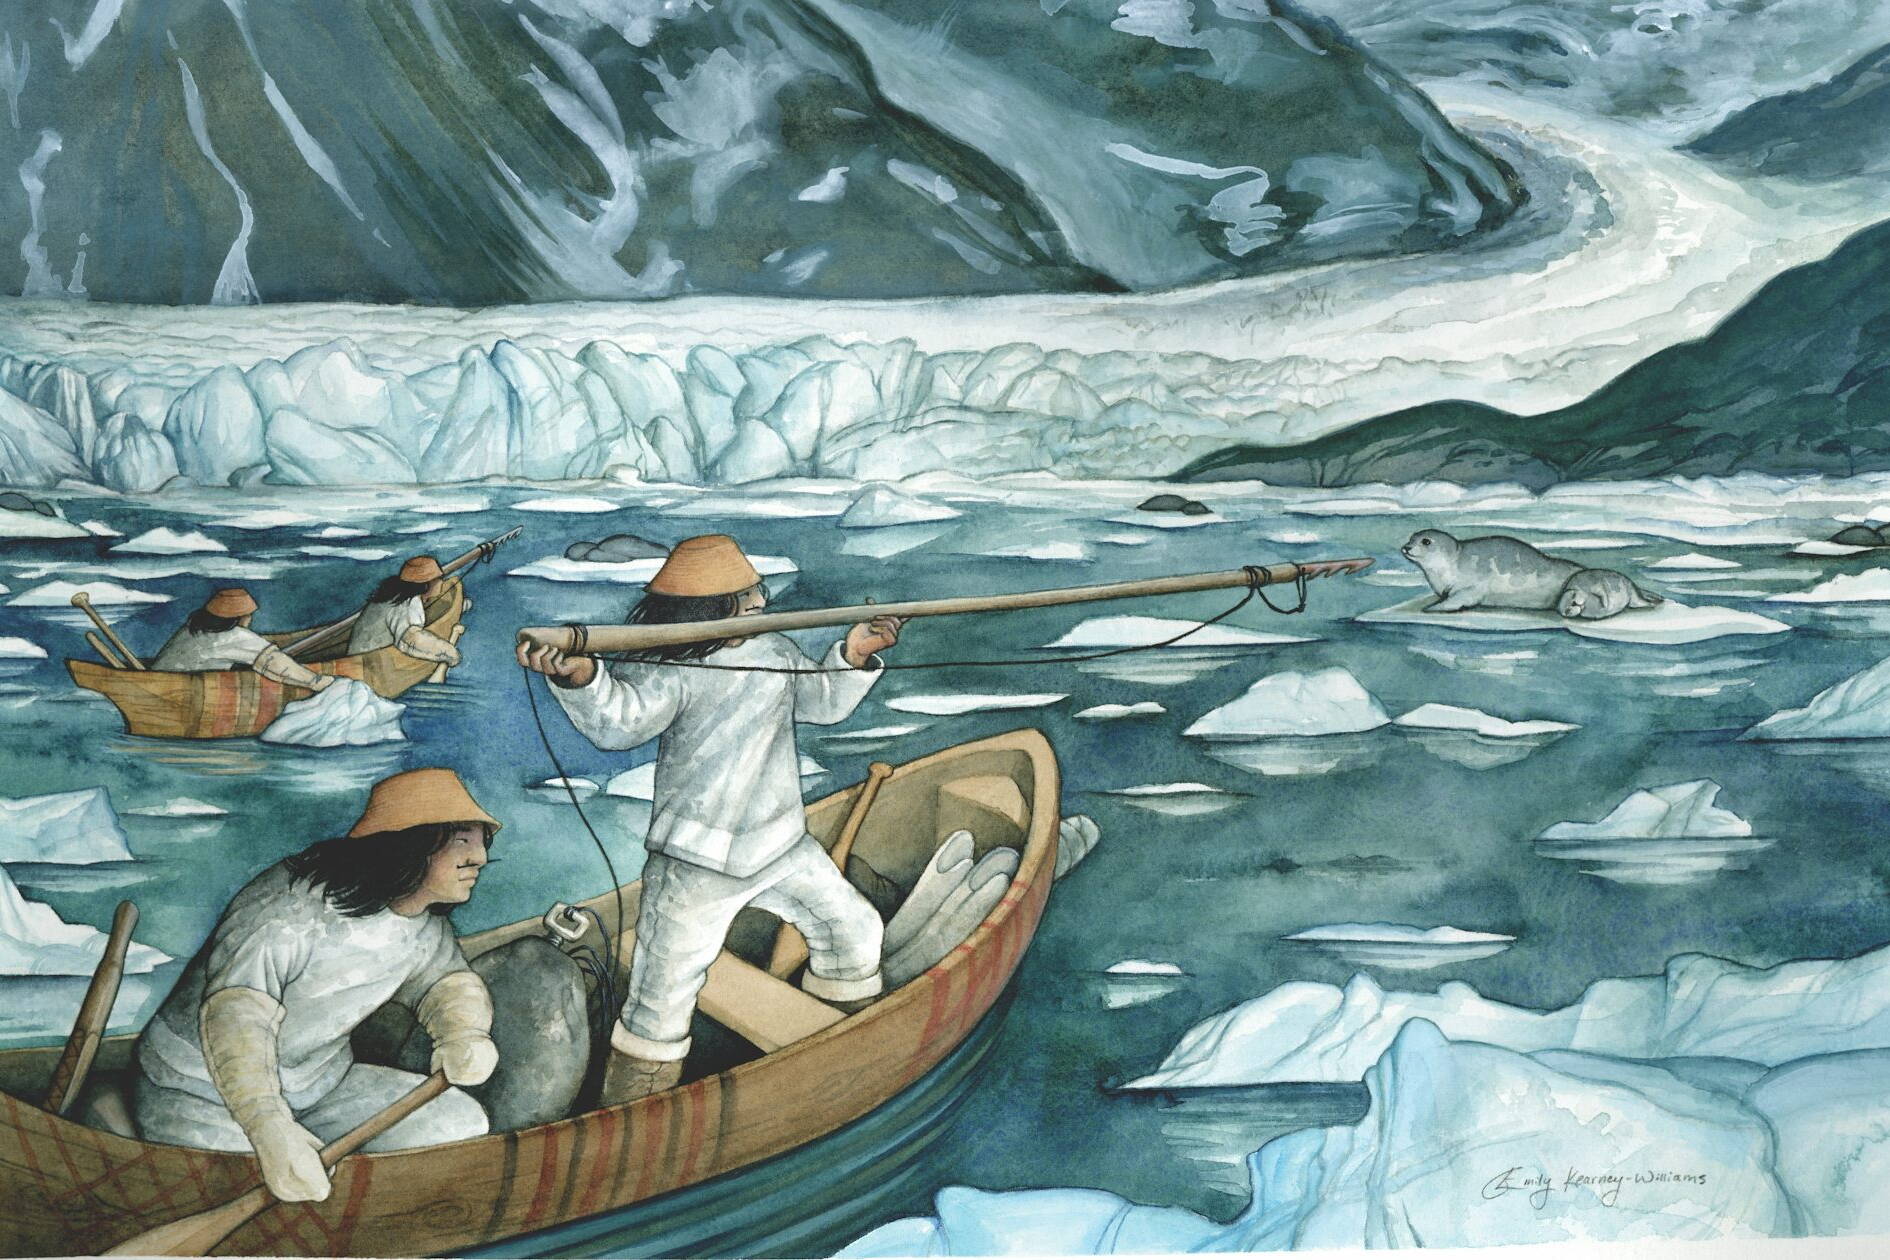 Ancestral seal hunting happened at the edge of the Sít Tlein (Hubbard) glacier. Emily Kearney-Williams © Smithsonian Institution